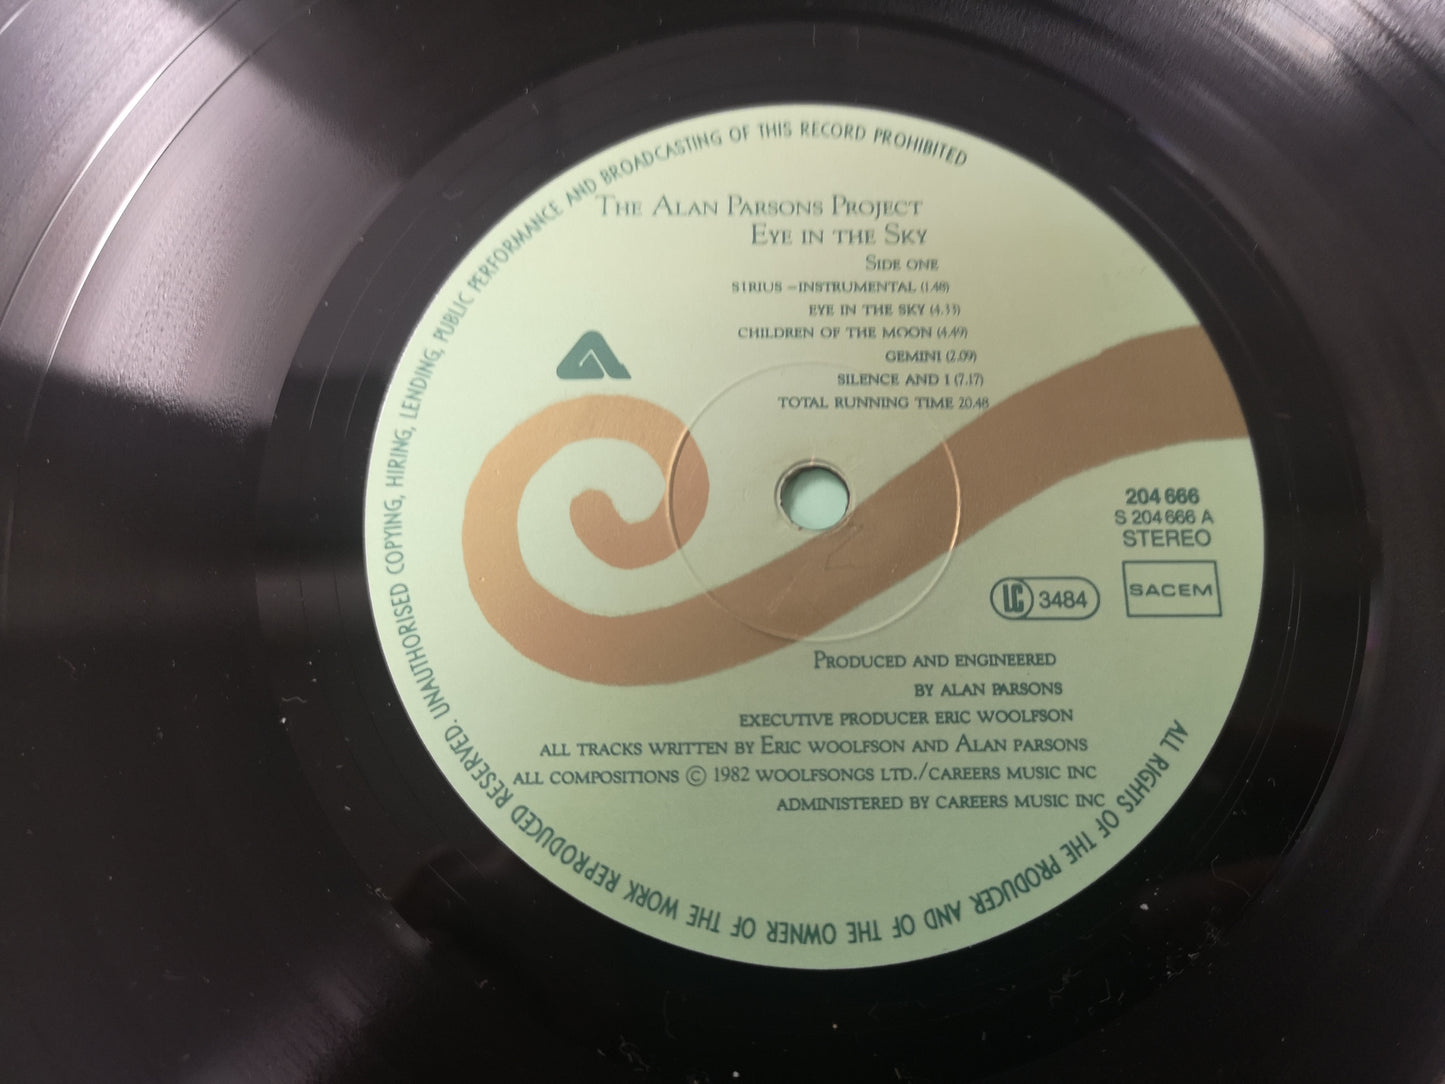 Alan Parsons Project "Eye in the Sky" Orig Germany/France 1982 VG++/M-